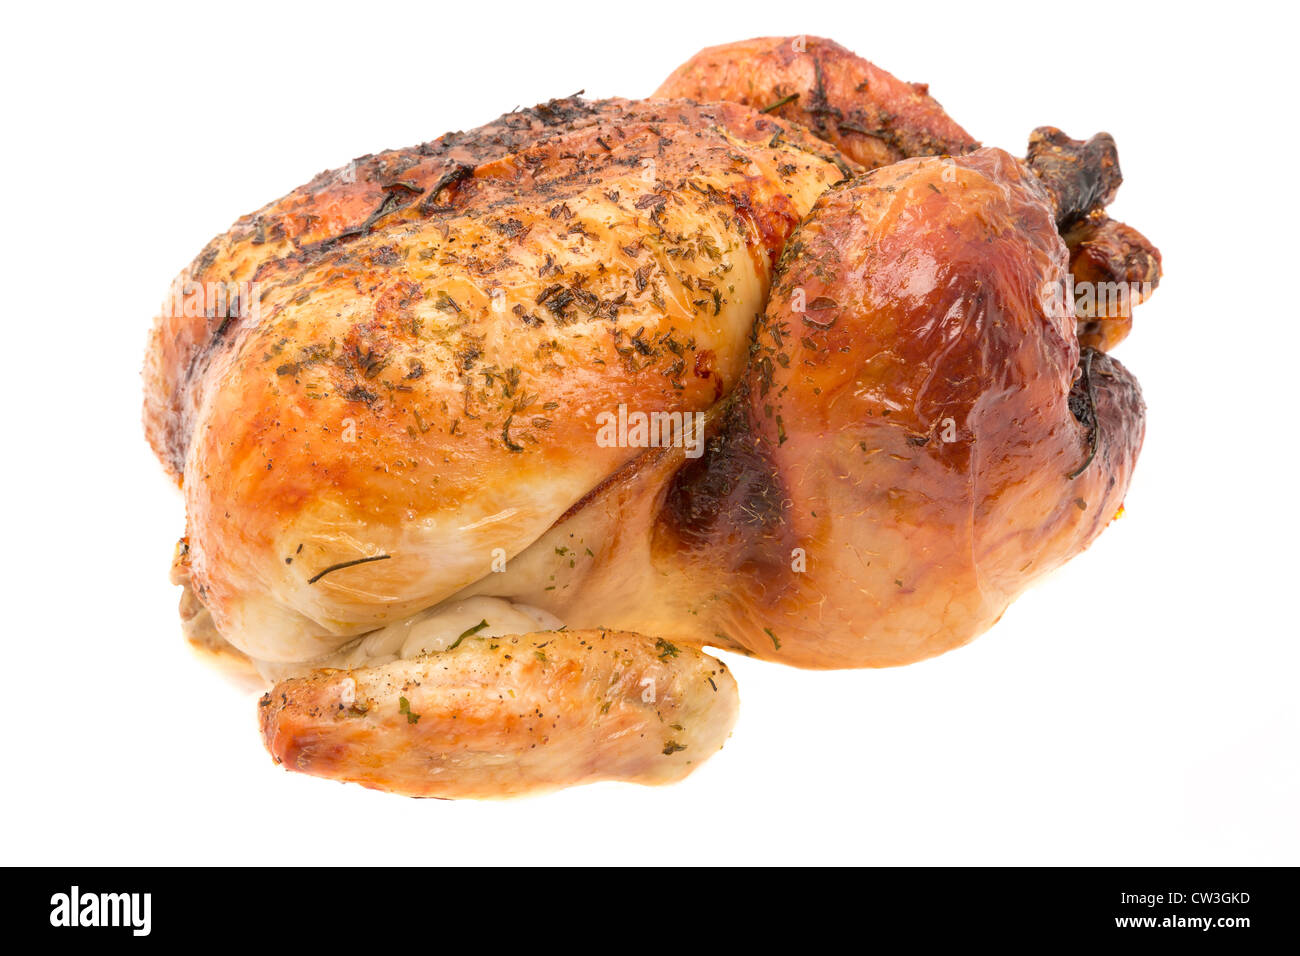 A ready to eat freshly roasted chicken - studio shot with a white background Stock Photo